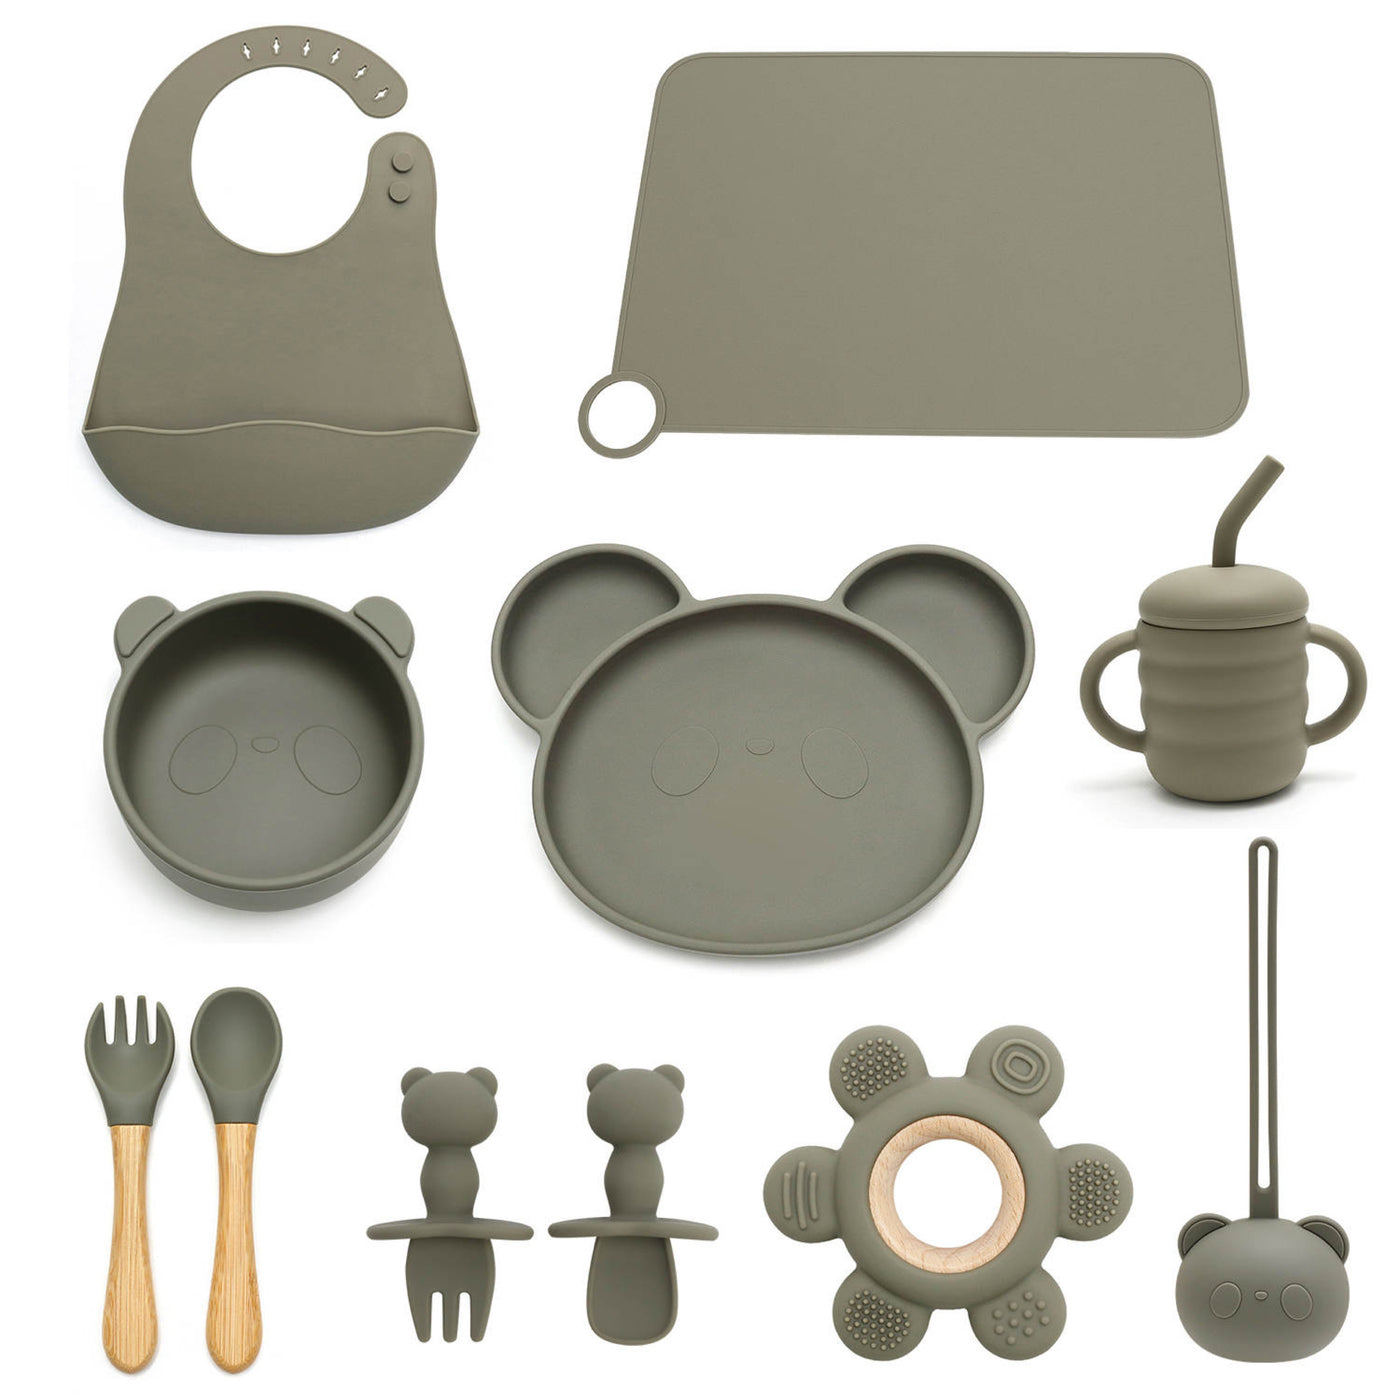 ARMY GREEN 11 PIECE SILICONE BABY AND TODDLER NON-SLIP SUCTION CUP FEEDING SET